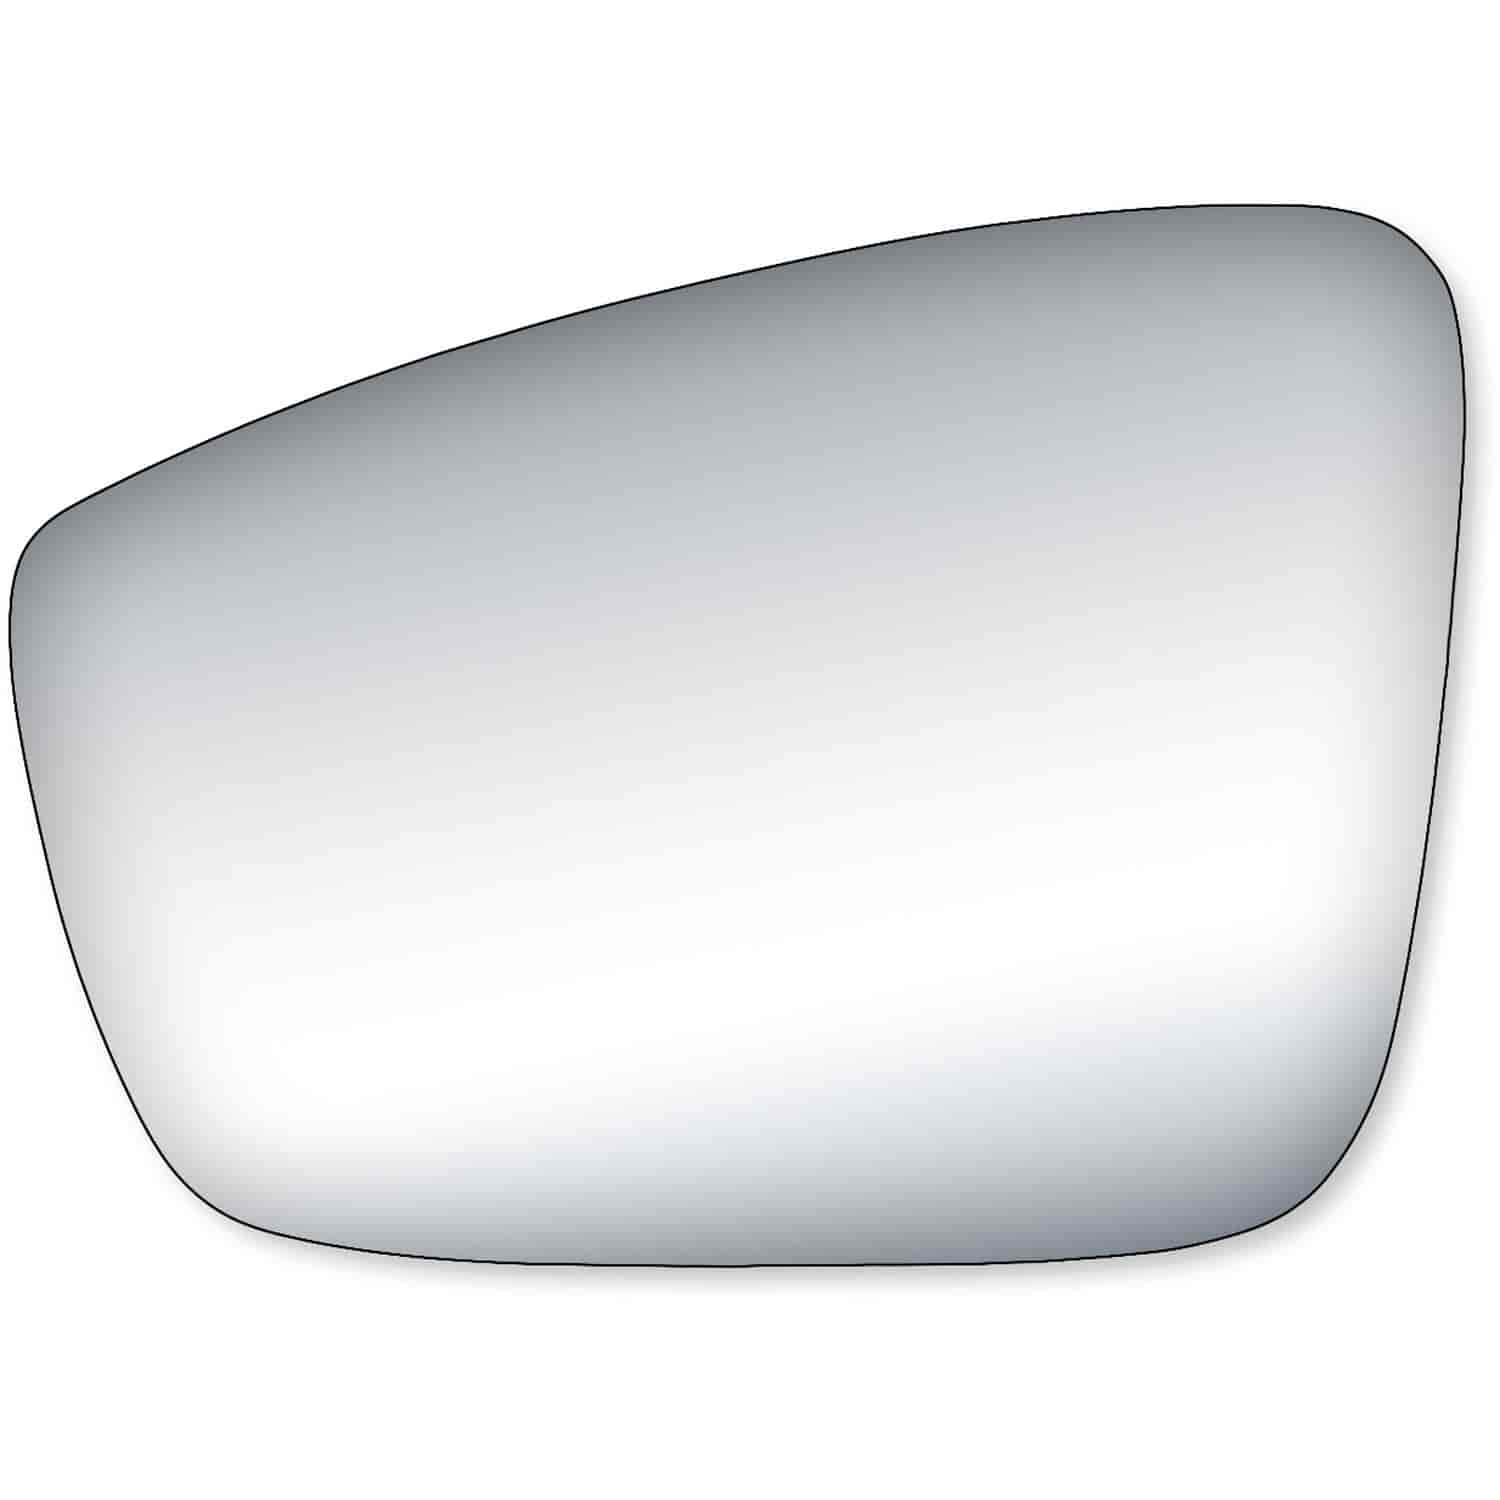 Replacement Glass for 12-14 Passat w/turn signal from 4/12 the glass measures 4 1/2 tall by 6 3/8 wi